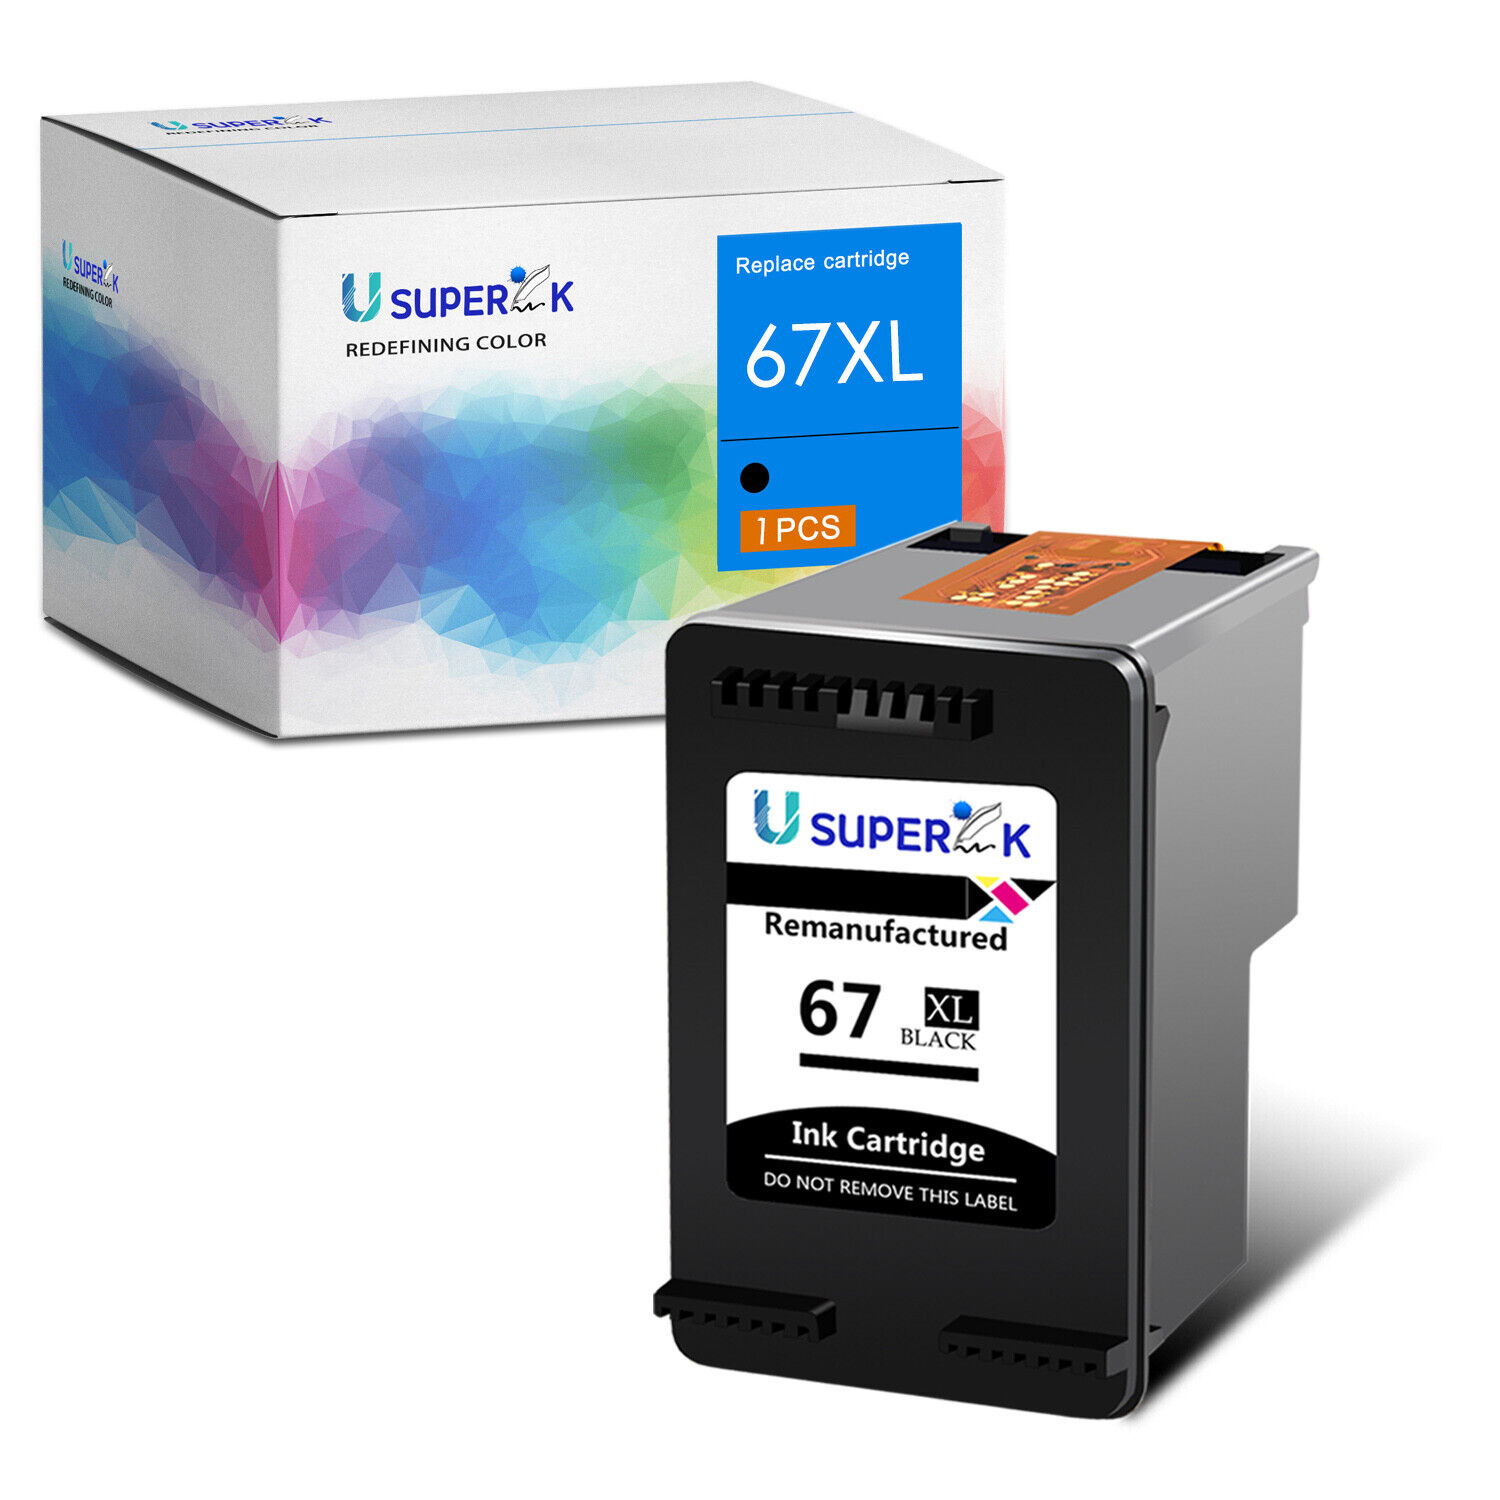 Compatible with 67XL HP DeskJet 1255 2722 2732 2752 2755 Generic Ink Cartridge